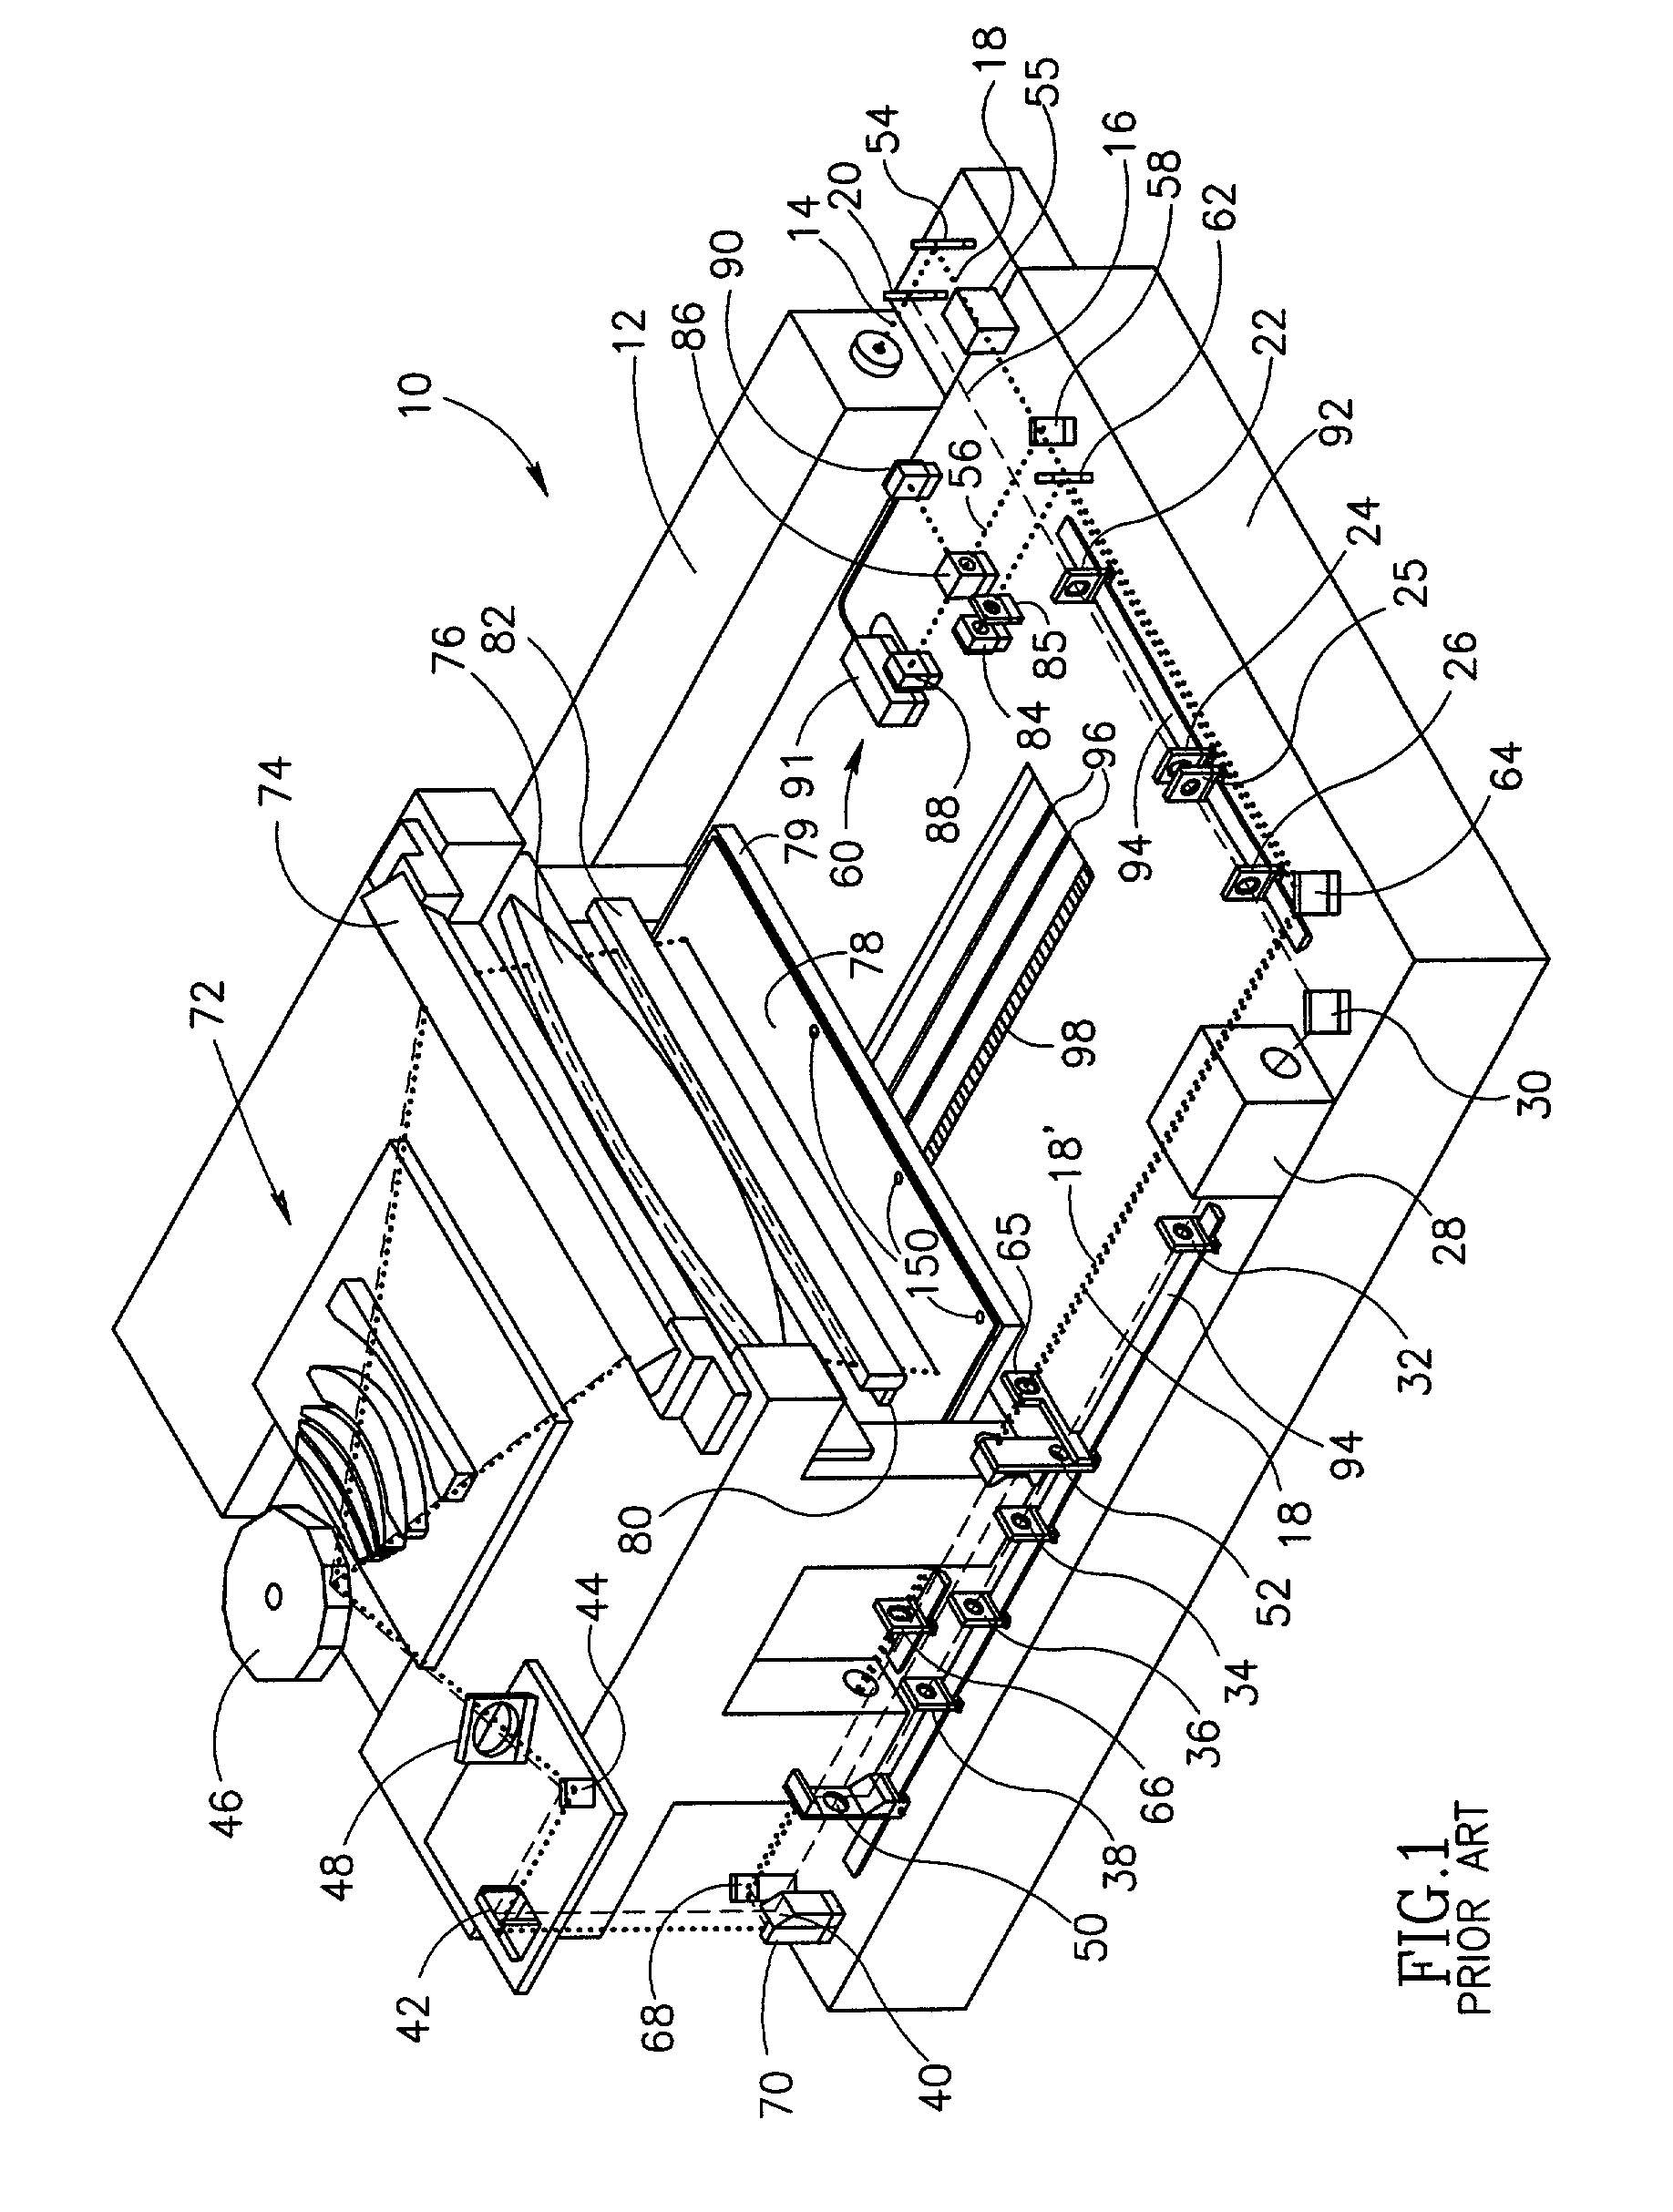 Multi-layer printed circuit board fabrication system and method